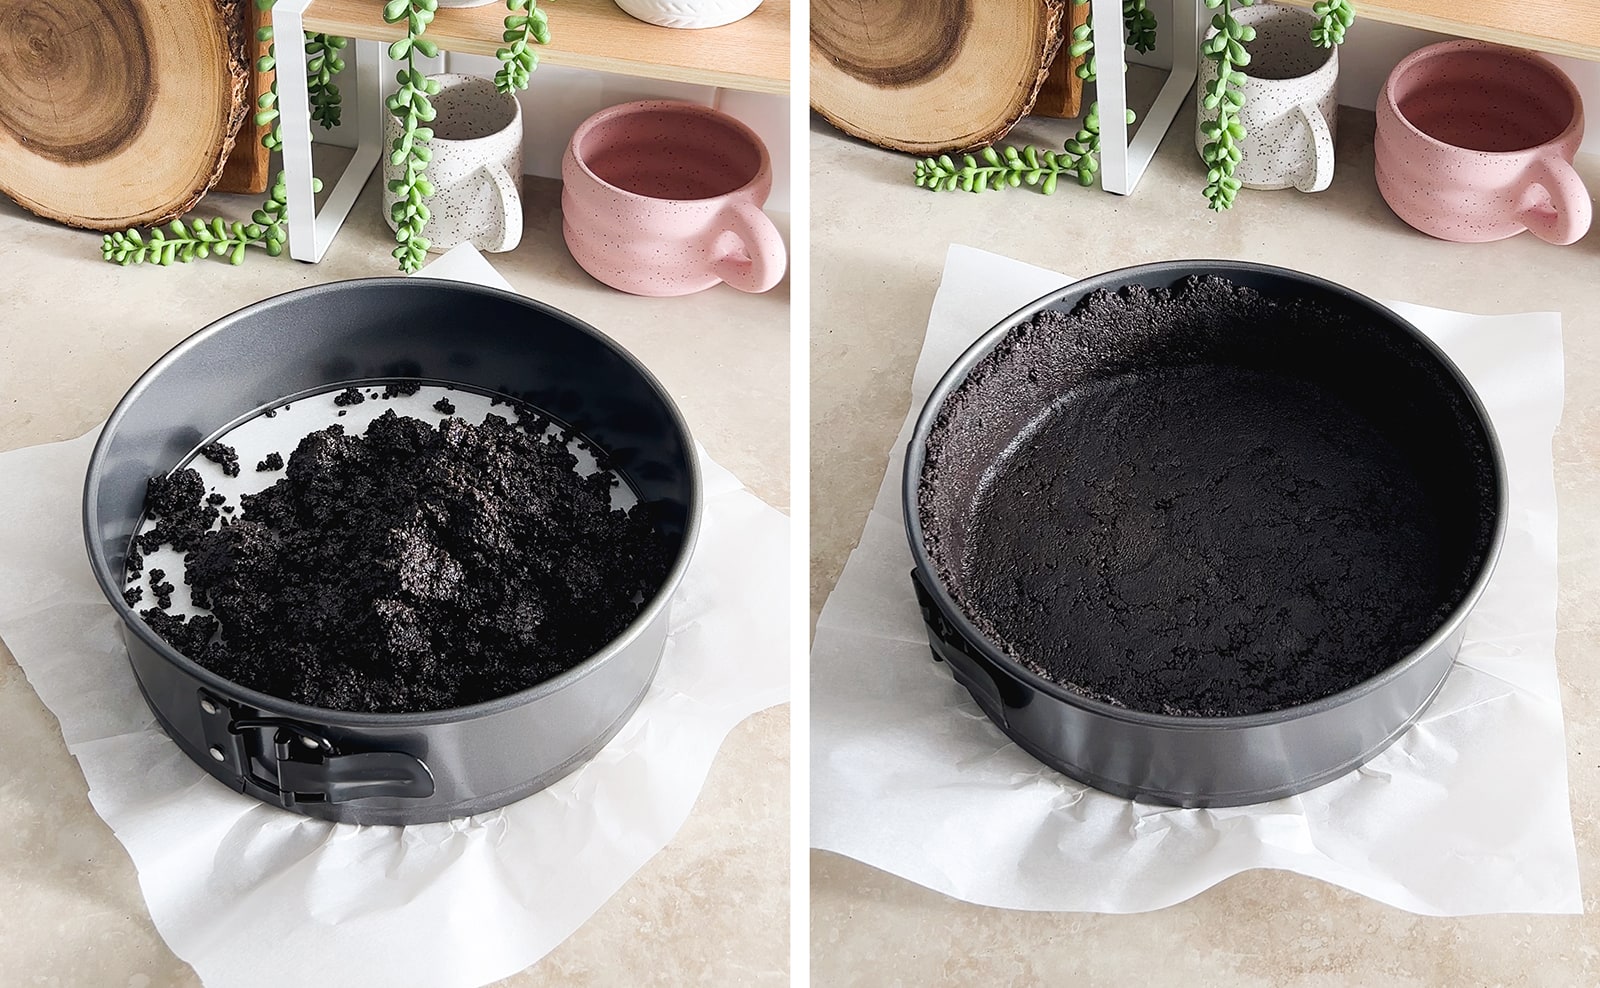 Left to right: oreo cookie crumbs in a springform form, oreo cookie crust formed on inside of springform pan.